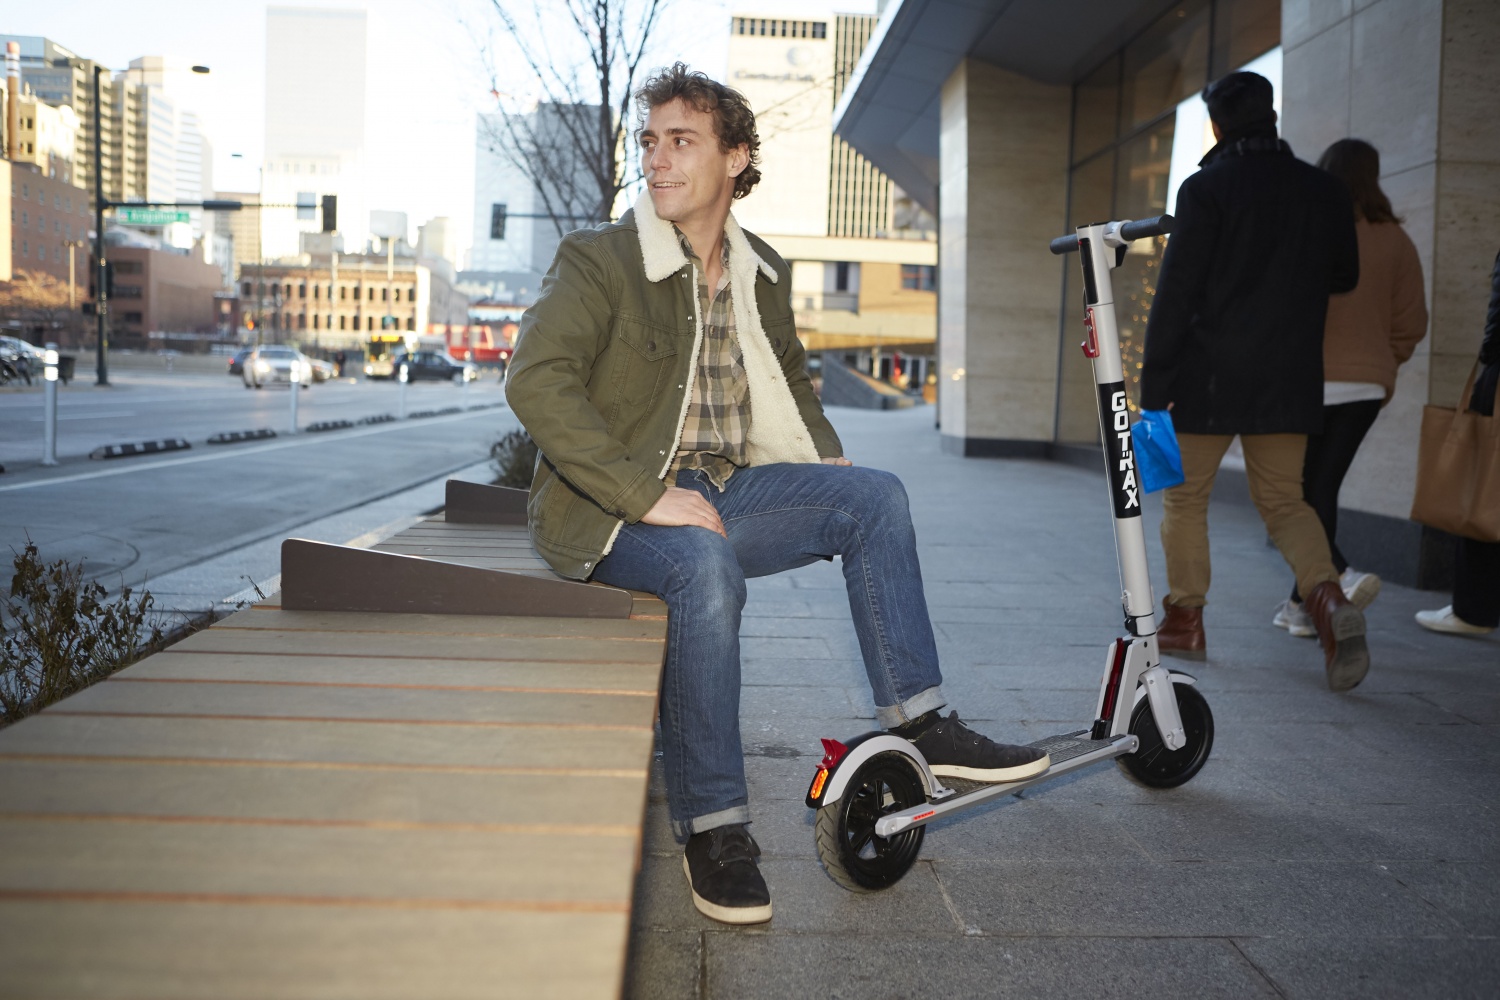 Xr Foldable Electric Scooter Model